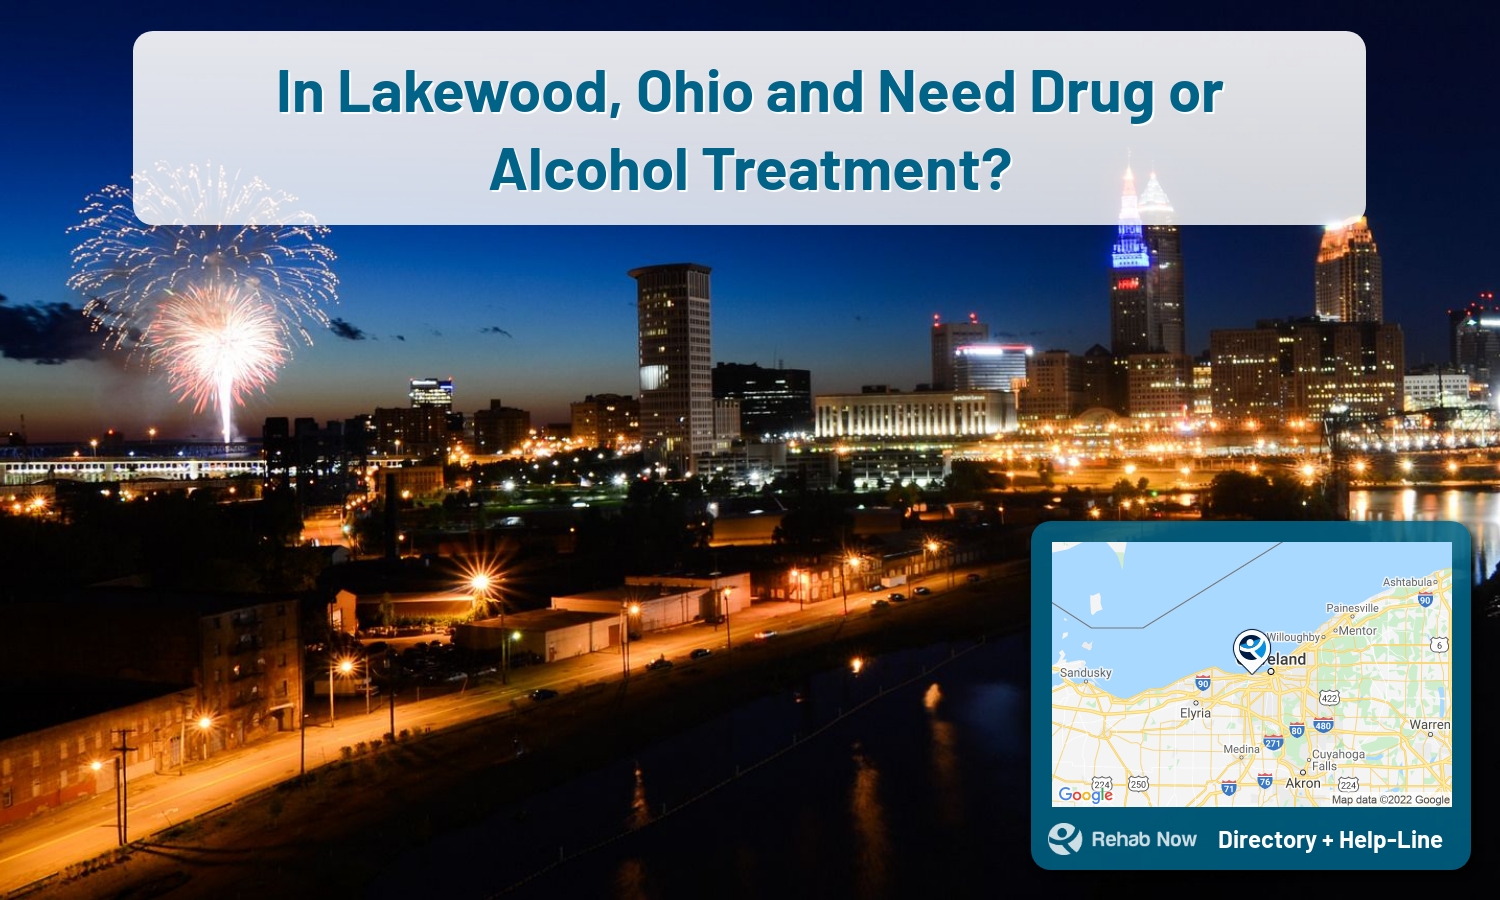 List of alcohol and drug treatment centers near you in Lakewood, Ohio. Research certifications, programs, methods, pricing, and more.